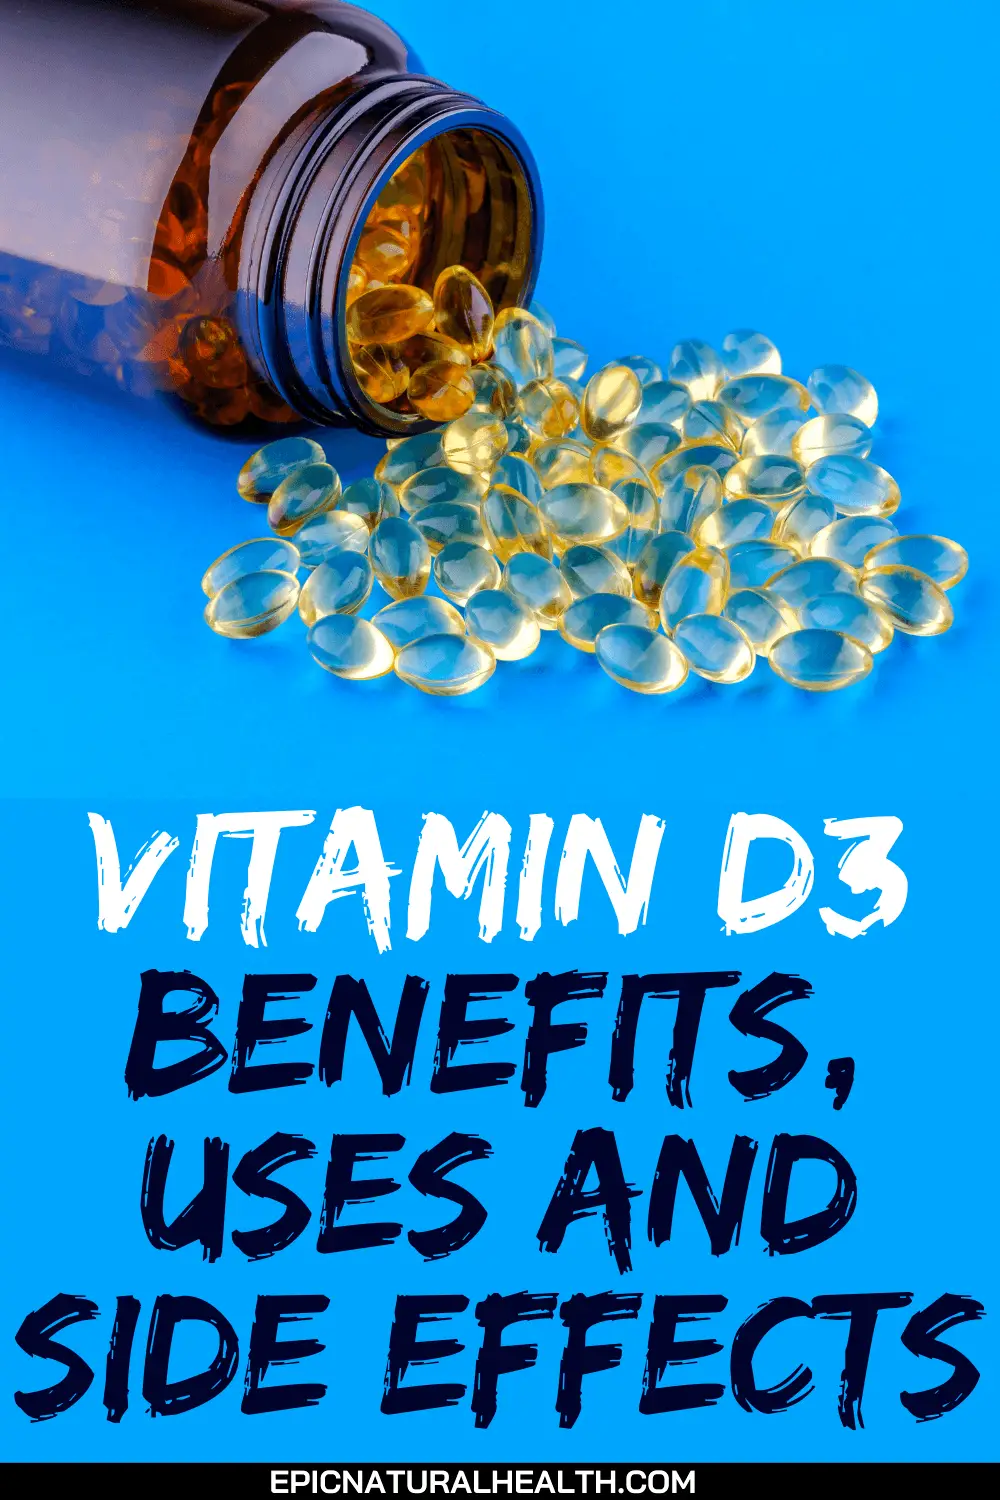 Vitamin d3 Benefits, Uses, and Side Effects